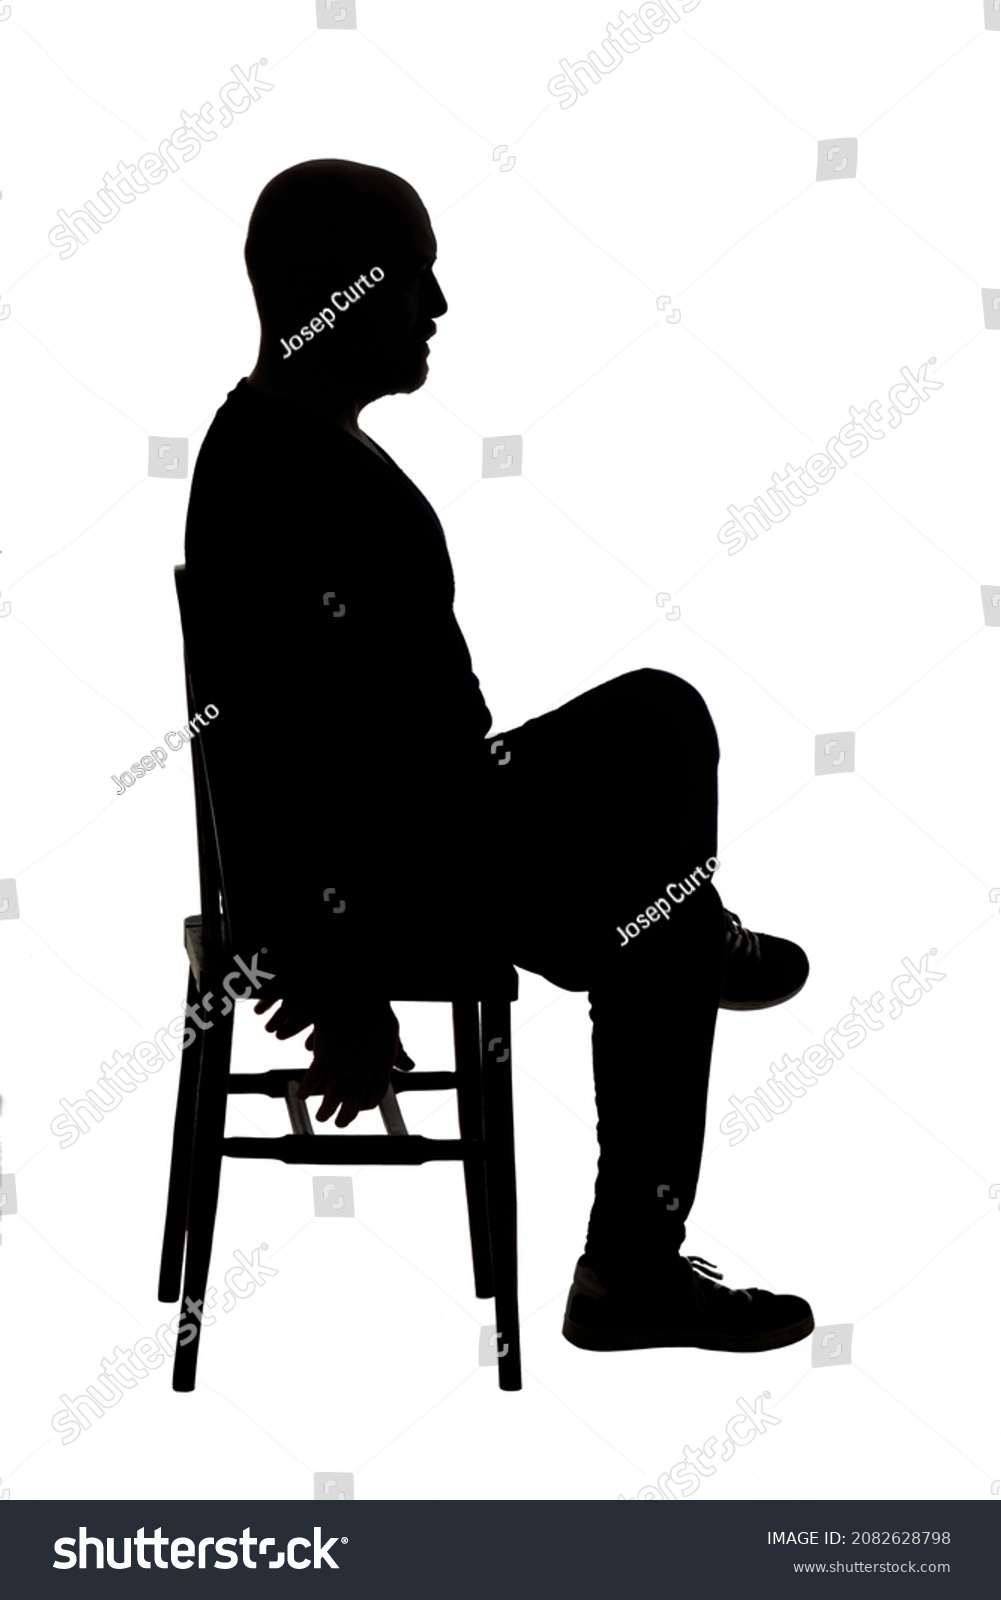 Side View Silhouette Man Sitting On Stock Photo 2082628798 | Shutterstock